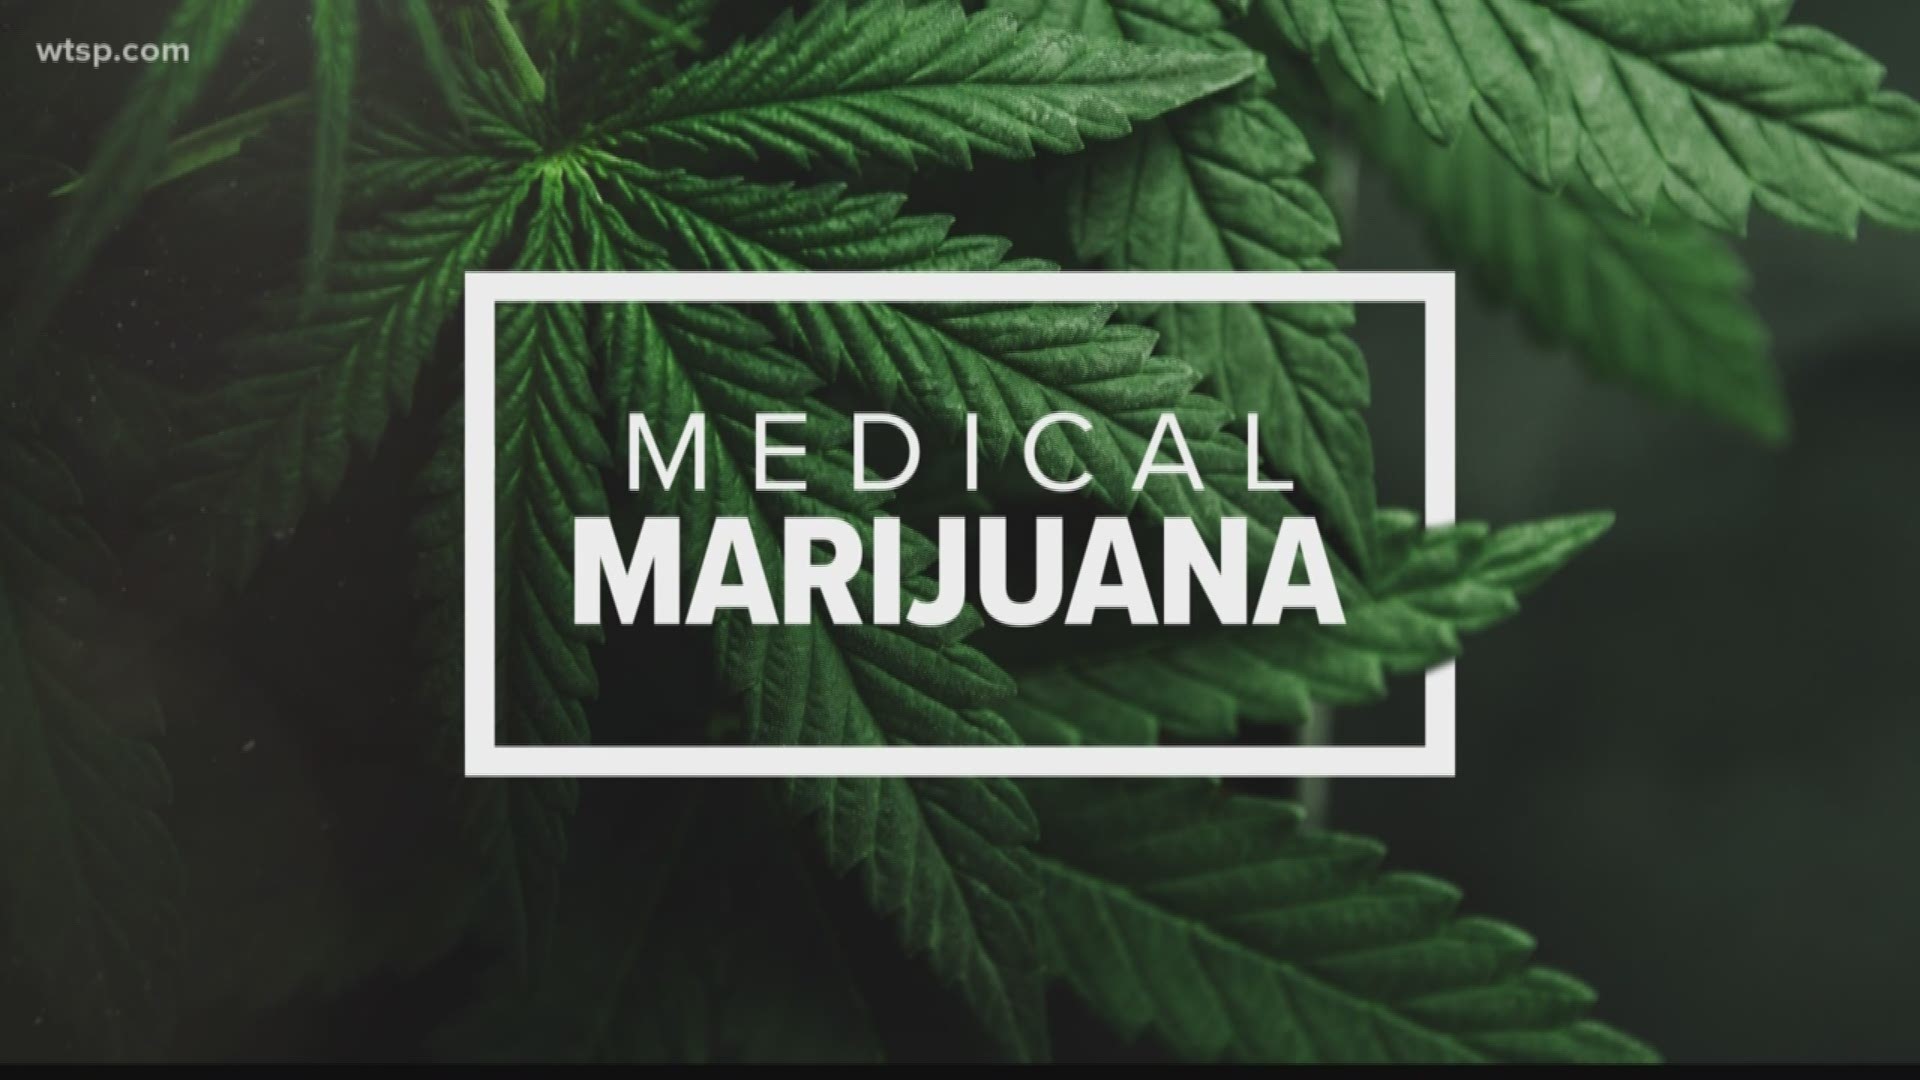 The move comes after 10Investigates found that not all the school districts in the Tampa Bay area have medical marijuana policies in place.